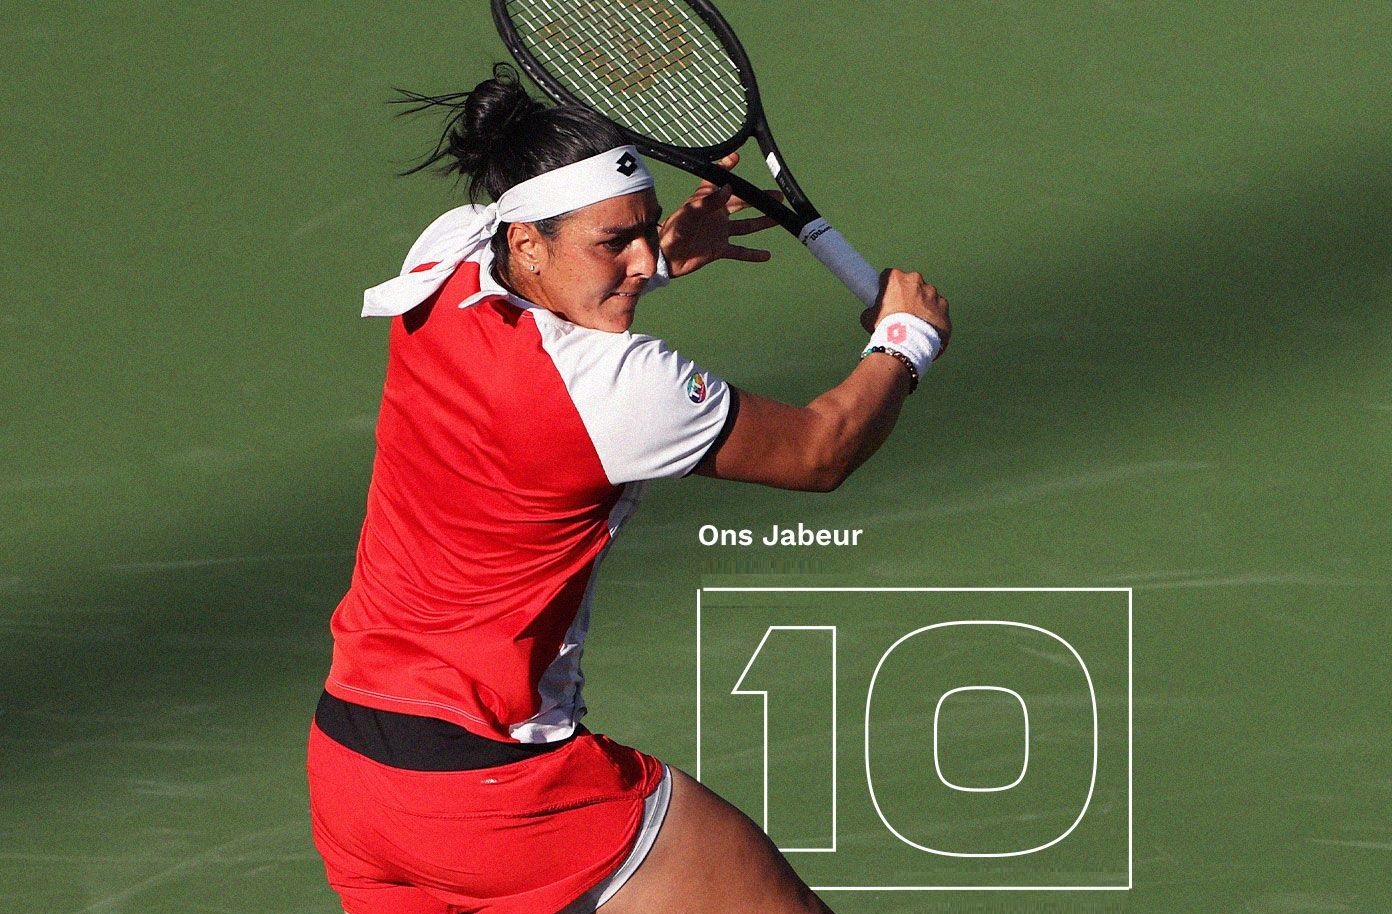 WTA Ranking a new ranking for Ons Jabeur